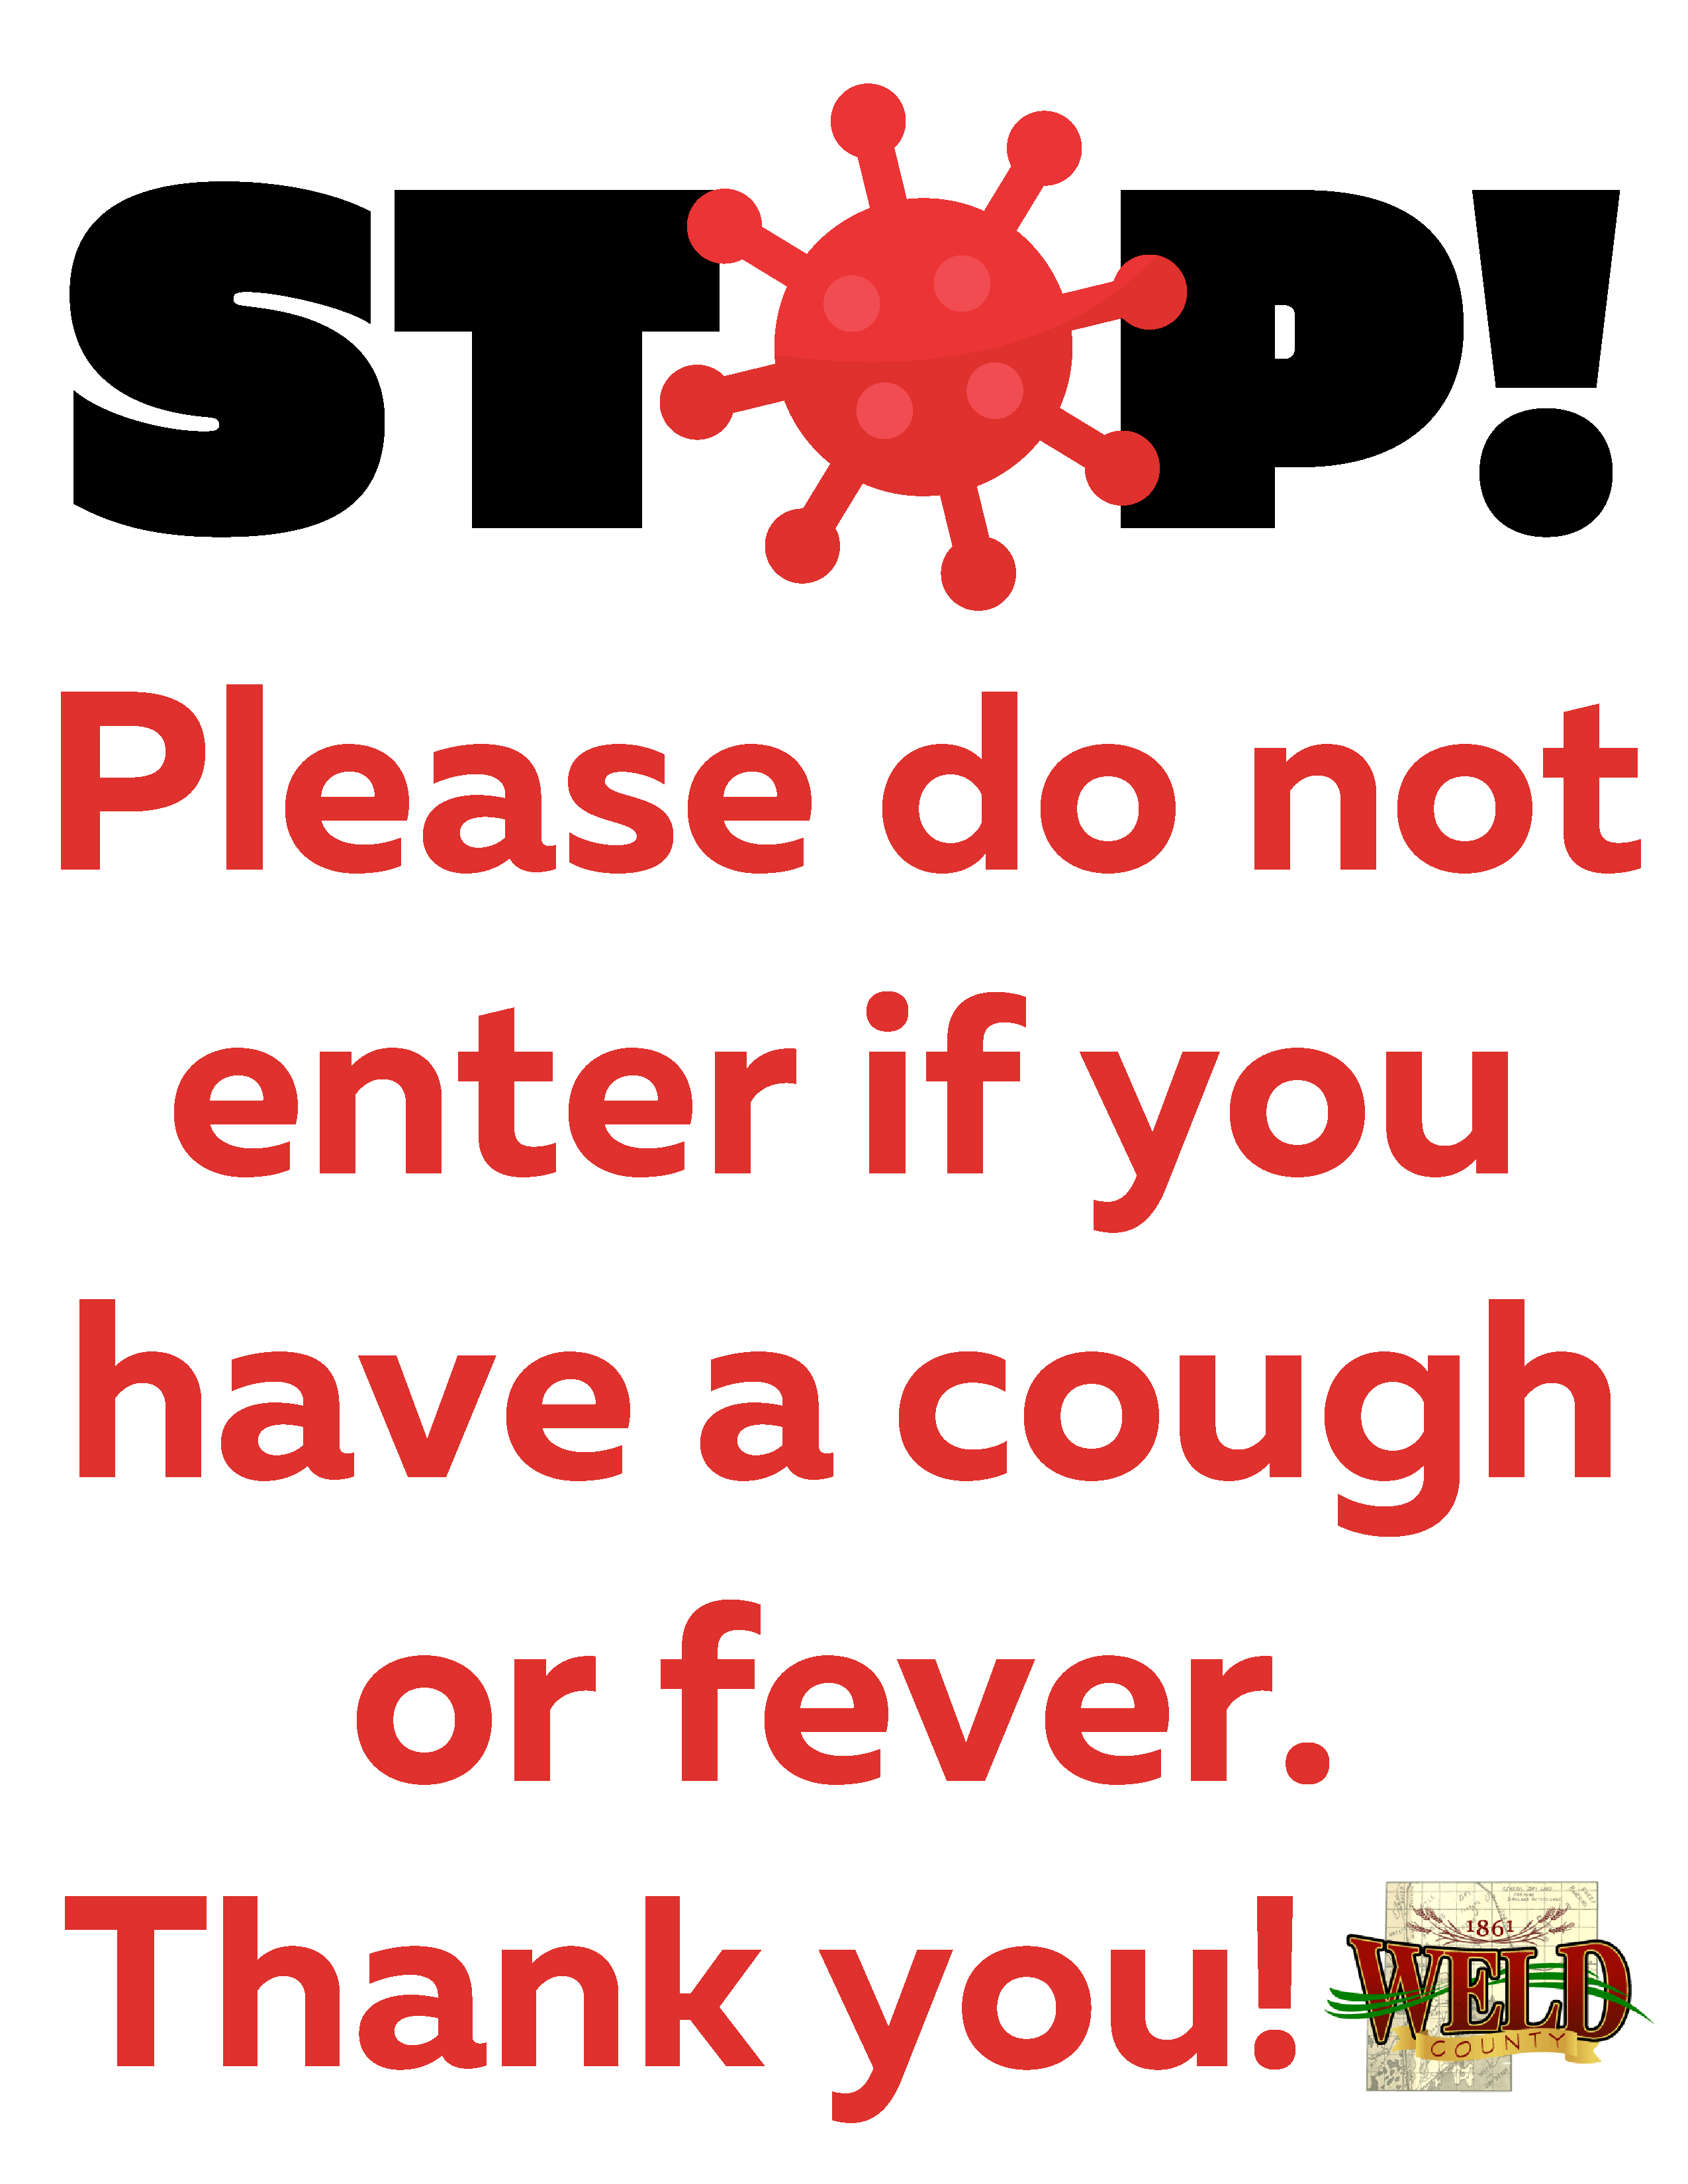 Reopen Sign: Don't Enter With Cough or Fever